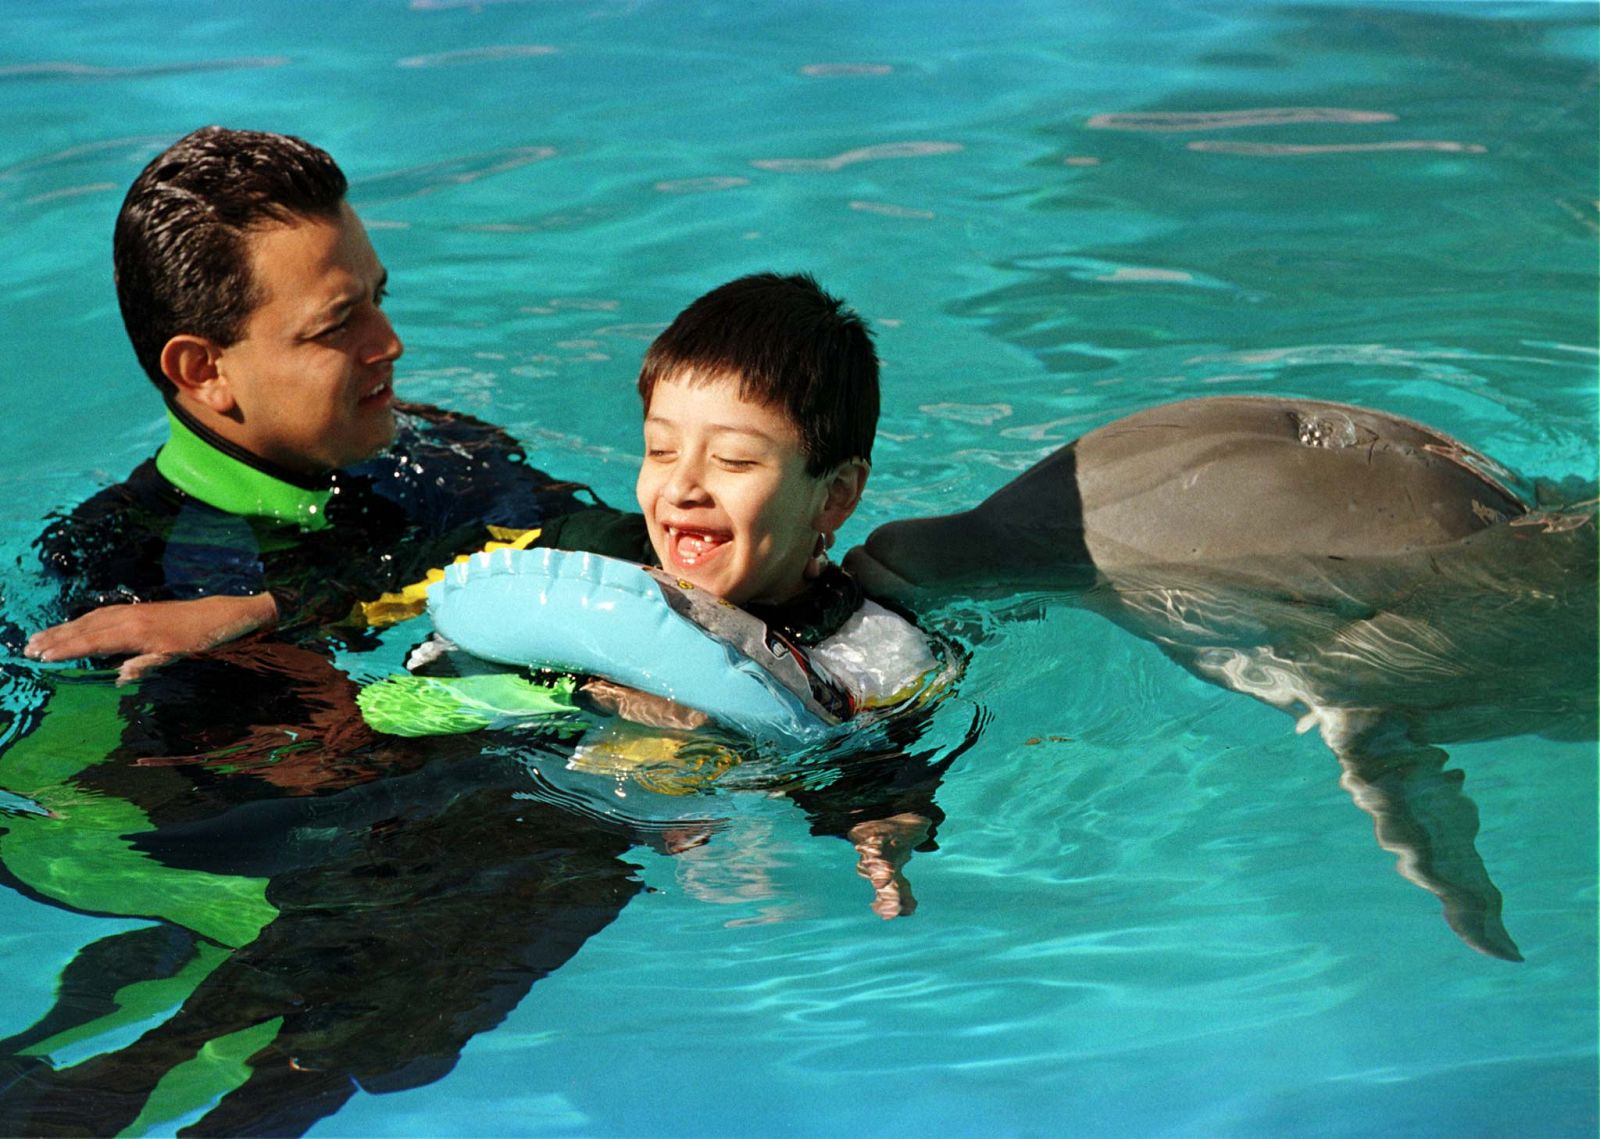 YOUNG HANDICAPED BOY RECEIVES THERAPY FROM A DOLPHIN